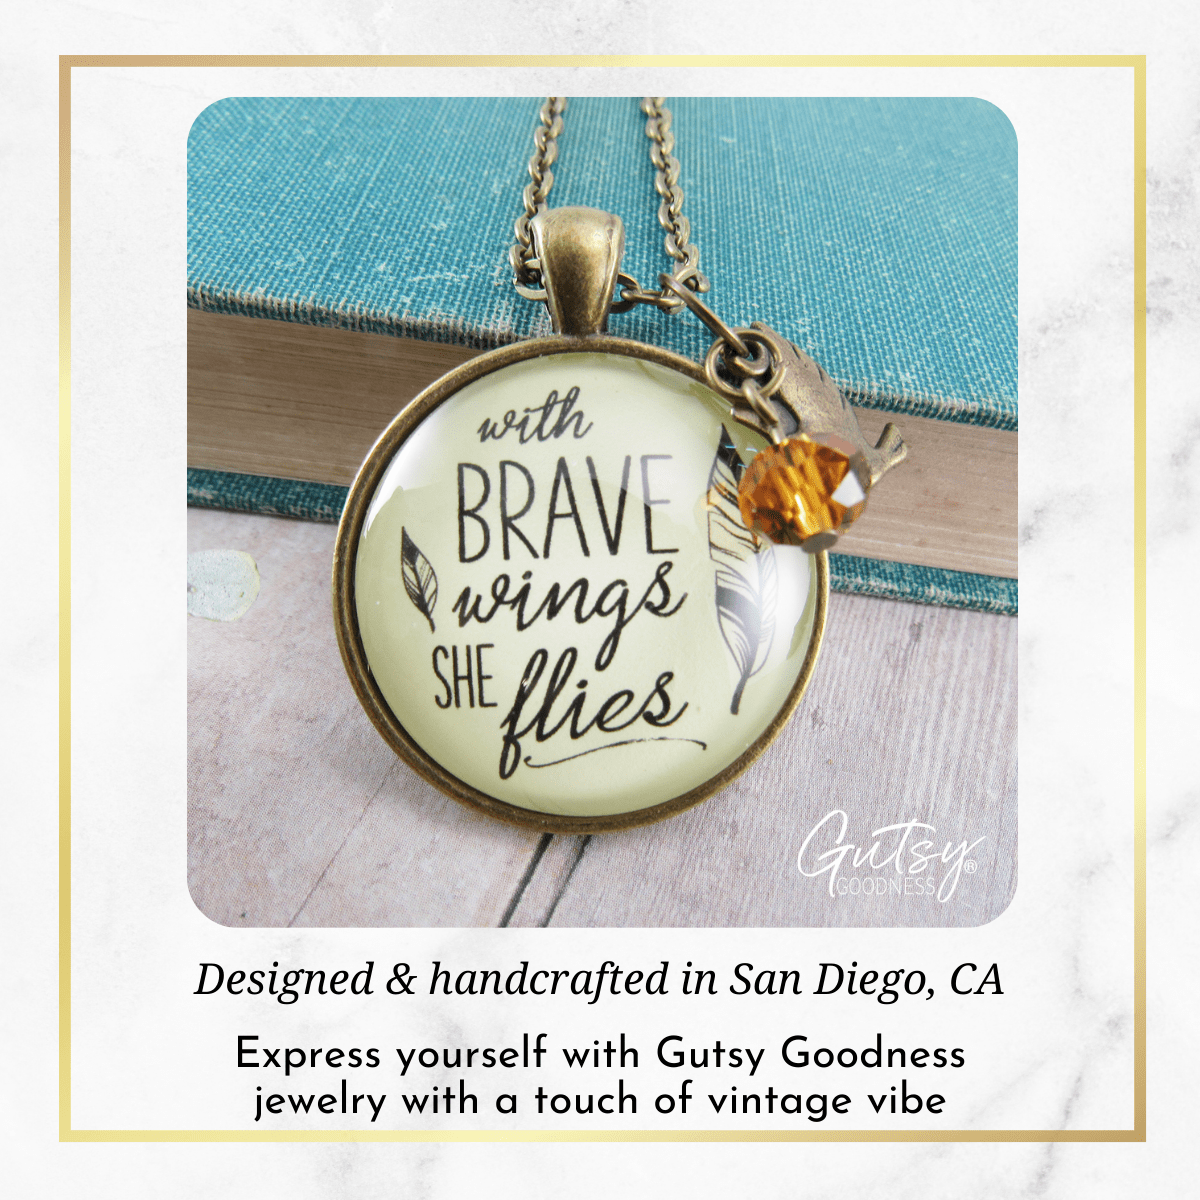 Gutsy Goodness Strong Women Necklace With Brave Wings She Flies Mantra Jewelry - Gutsy Goodness Handmade Jewelry;Strong Women Necklace With Brave Wings She Flies Mantra Jewelry - Gutsy Goodness Handmade Jewelry Gifts